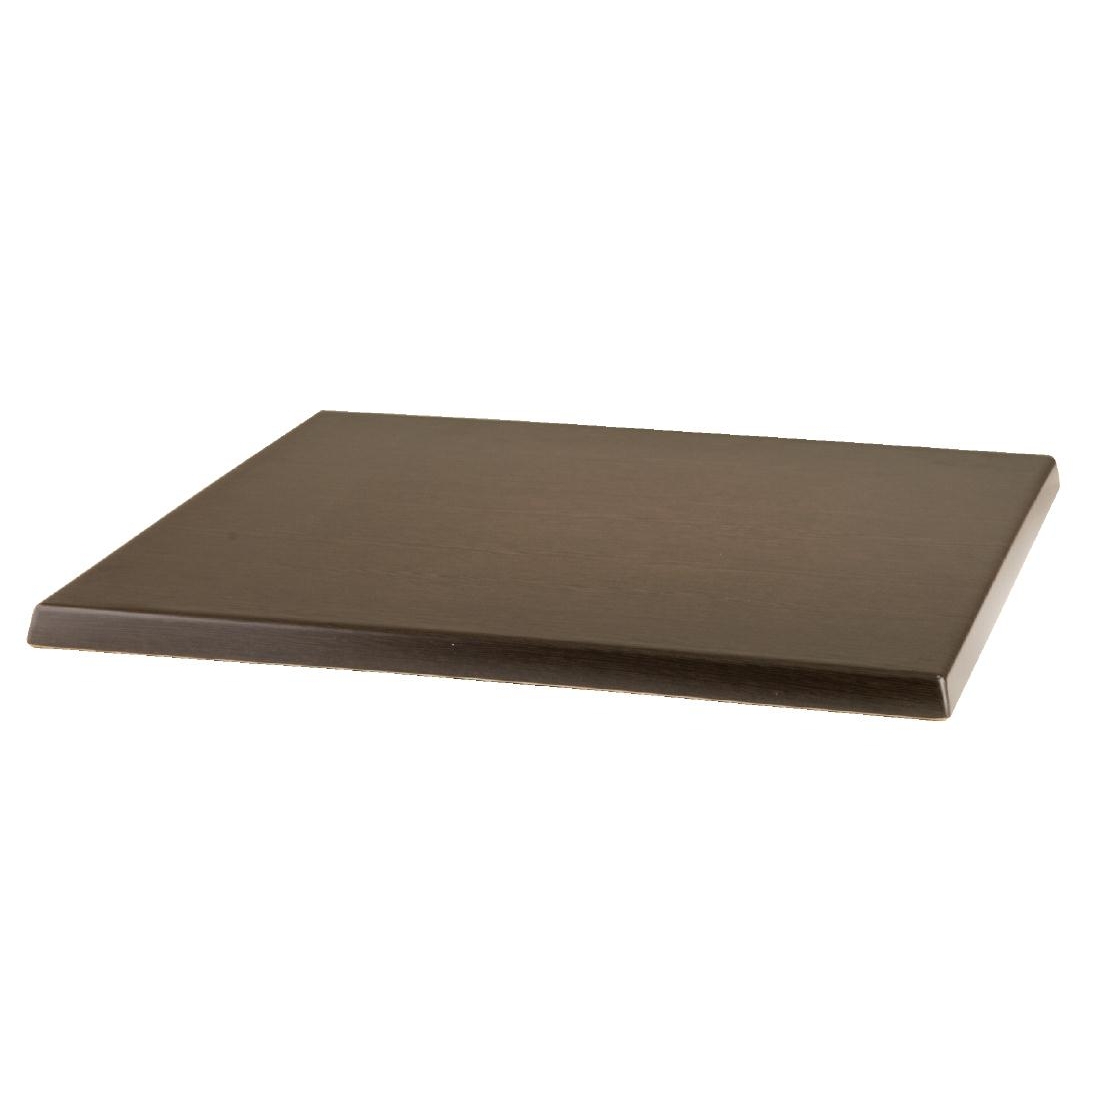 Werzalit Pre-drilled Square Table Top  Wenge 800mm